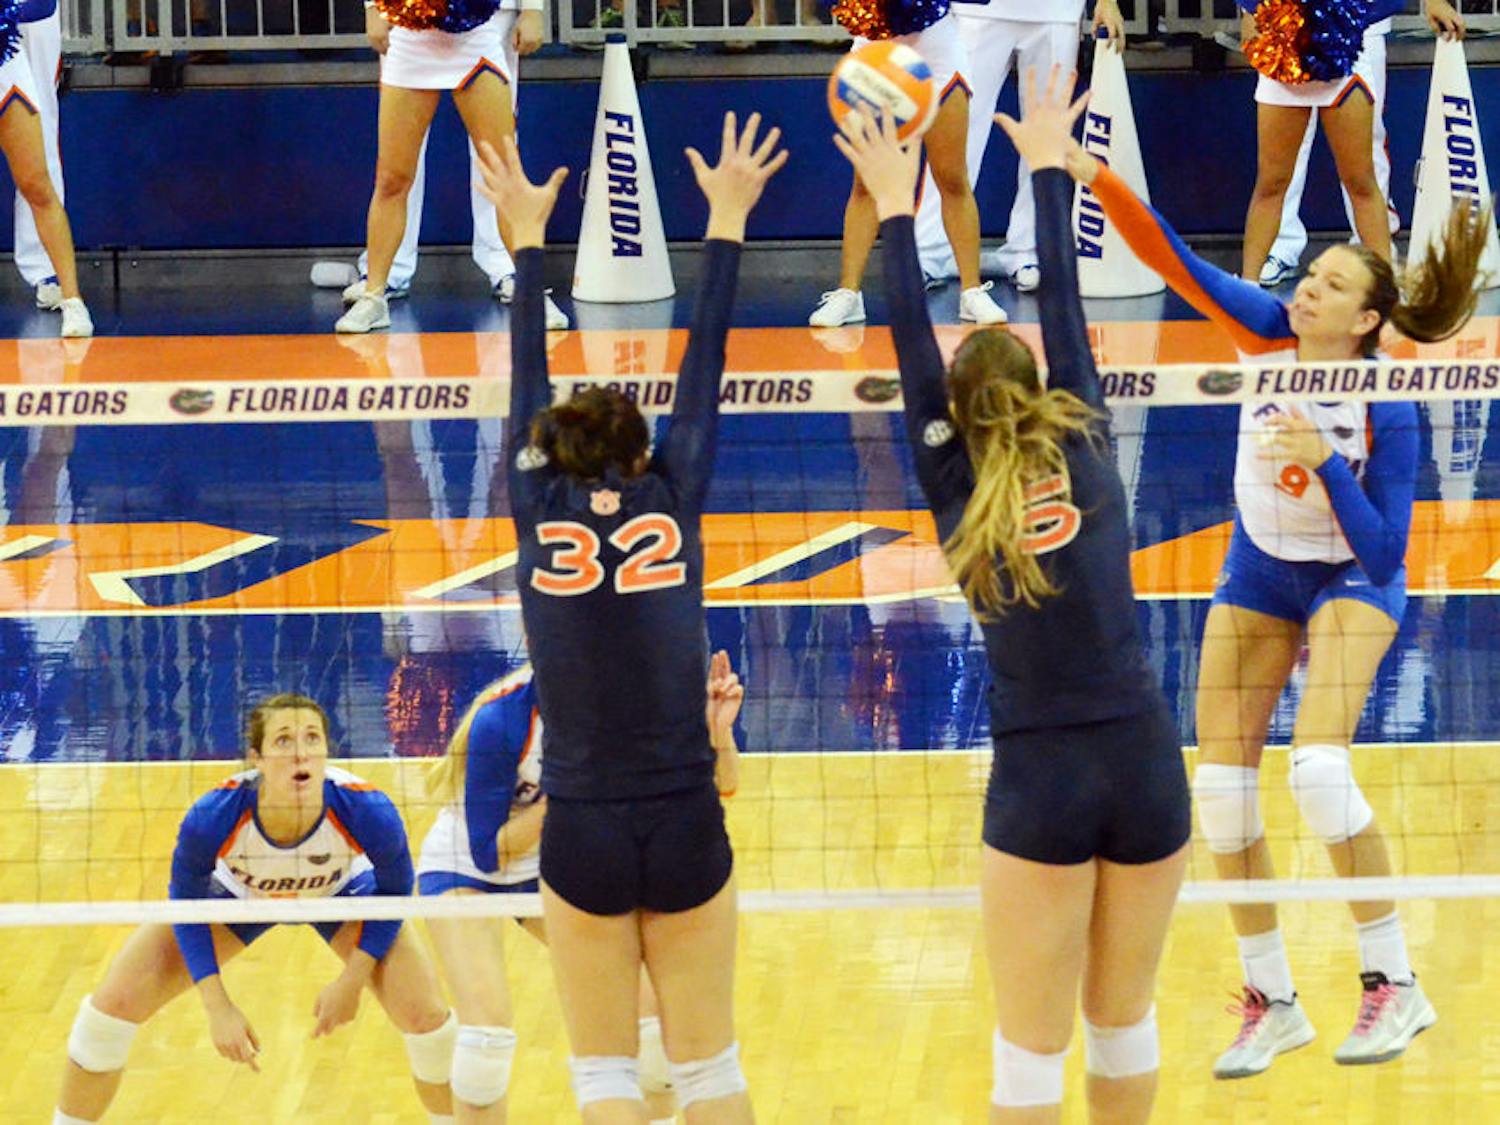 Ziva Recek swings for a kill attempt during Florida's 3-0 win against Auburn on Wednesday in the O'Connell Center